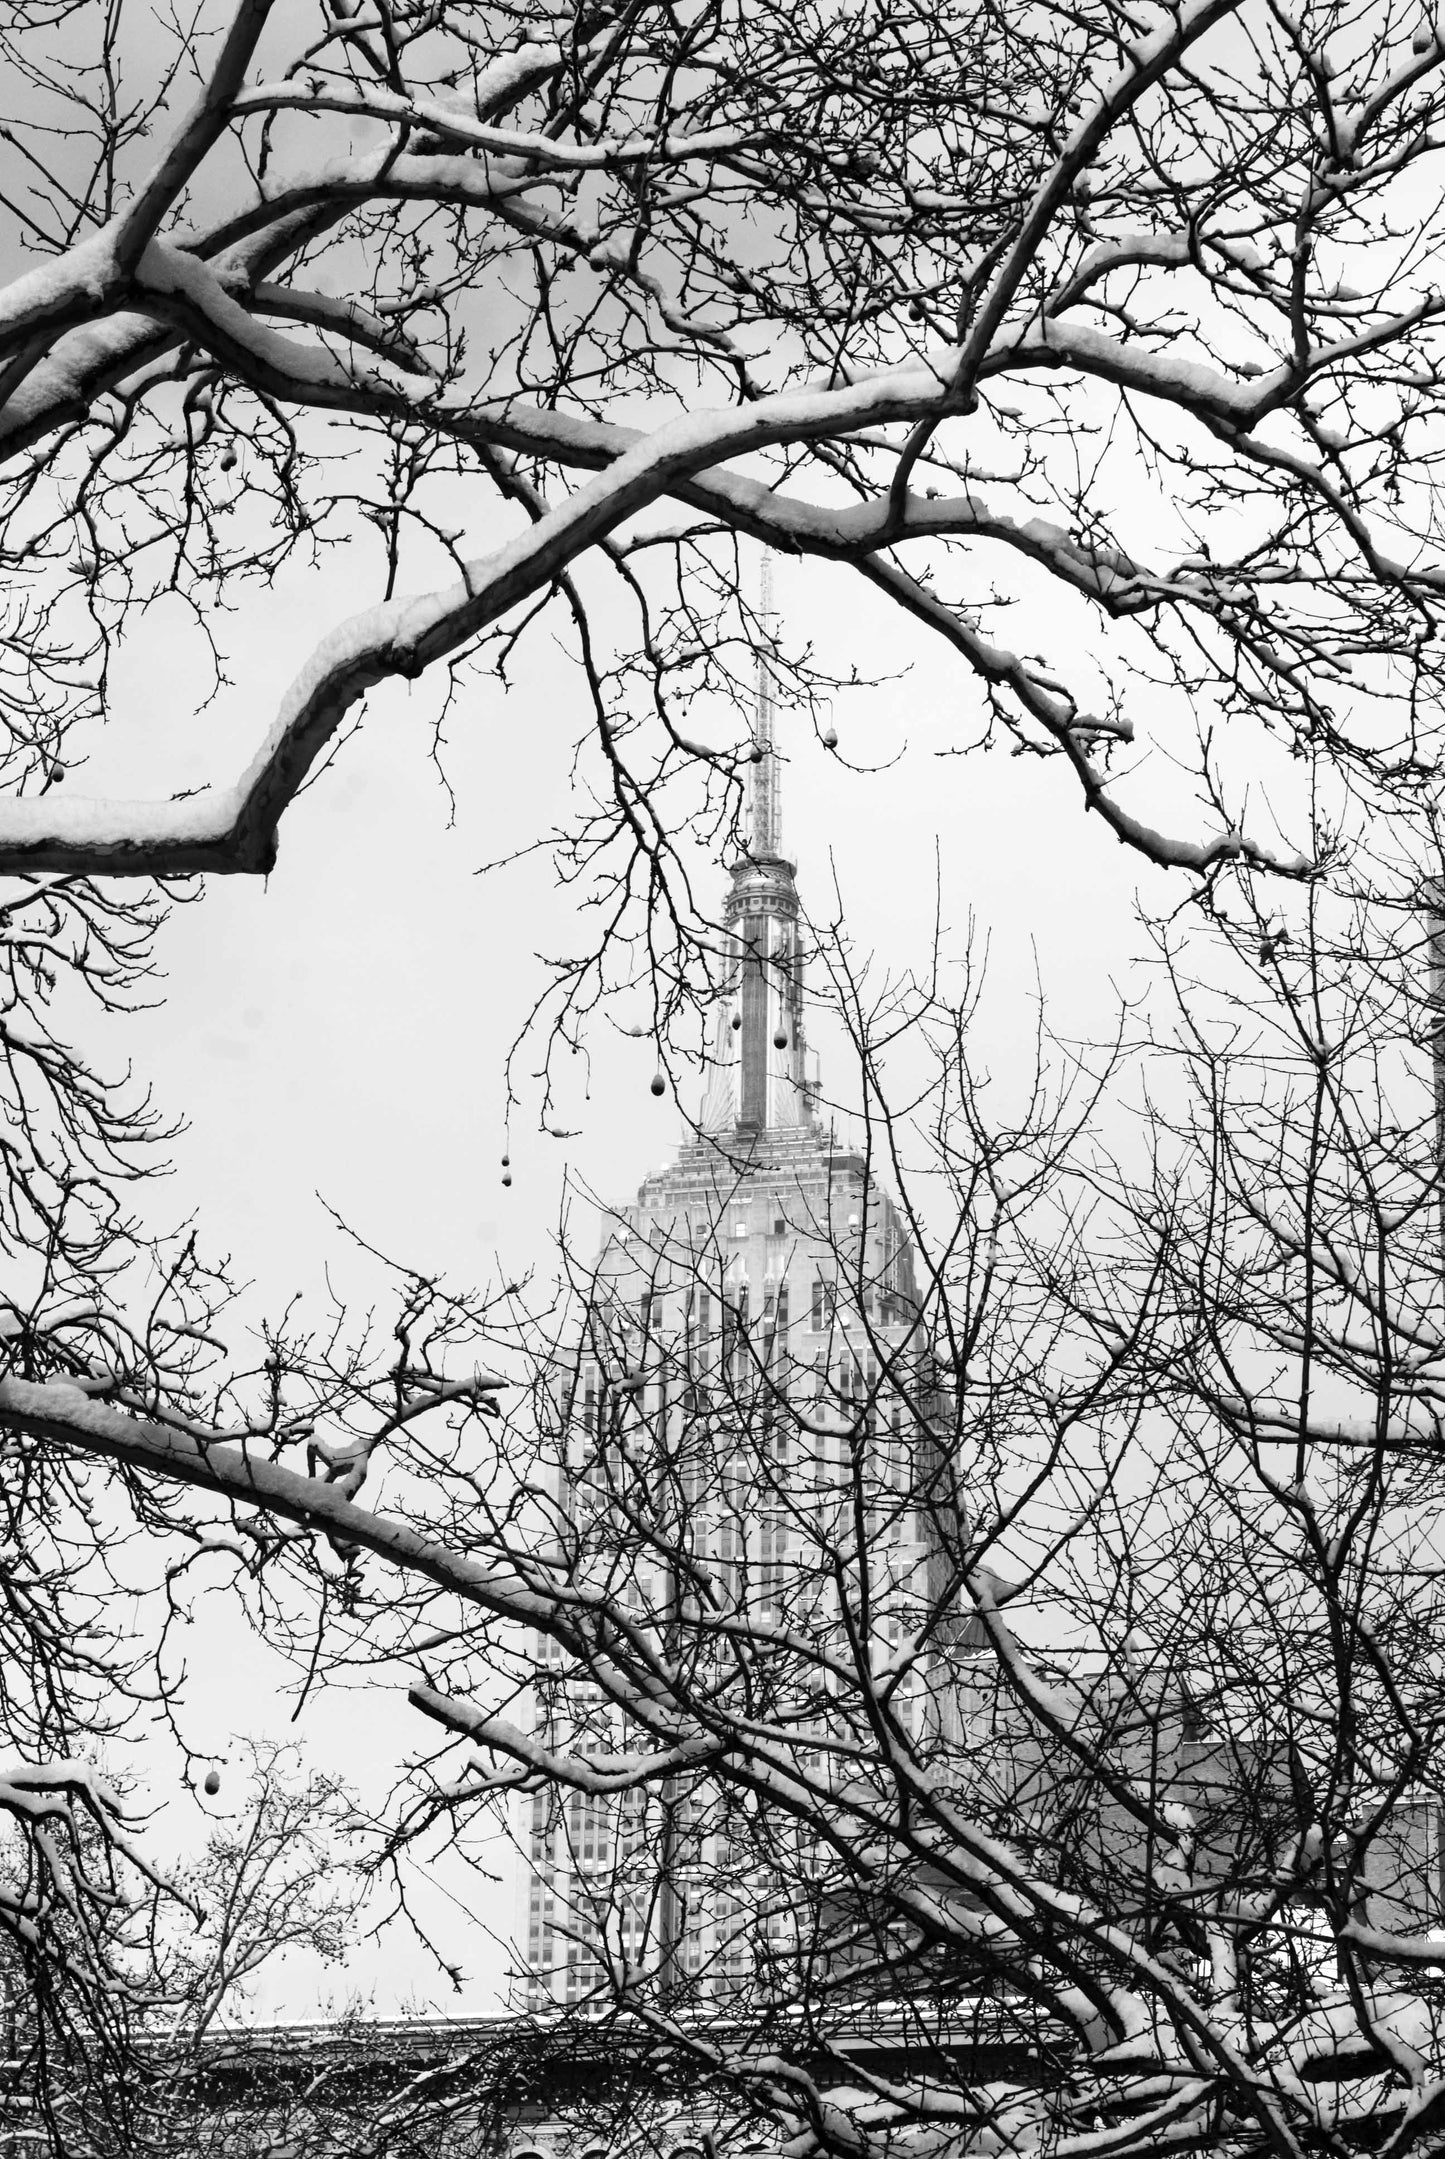 Alessandra Mattanza | ANOTHER VISION, New York. The Empire State Building stands tall on a winters day. Available as an art print or as a photographic print on acrylic glass.